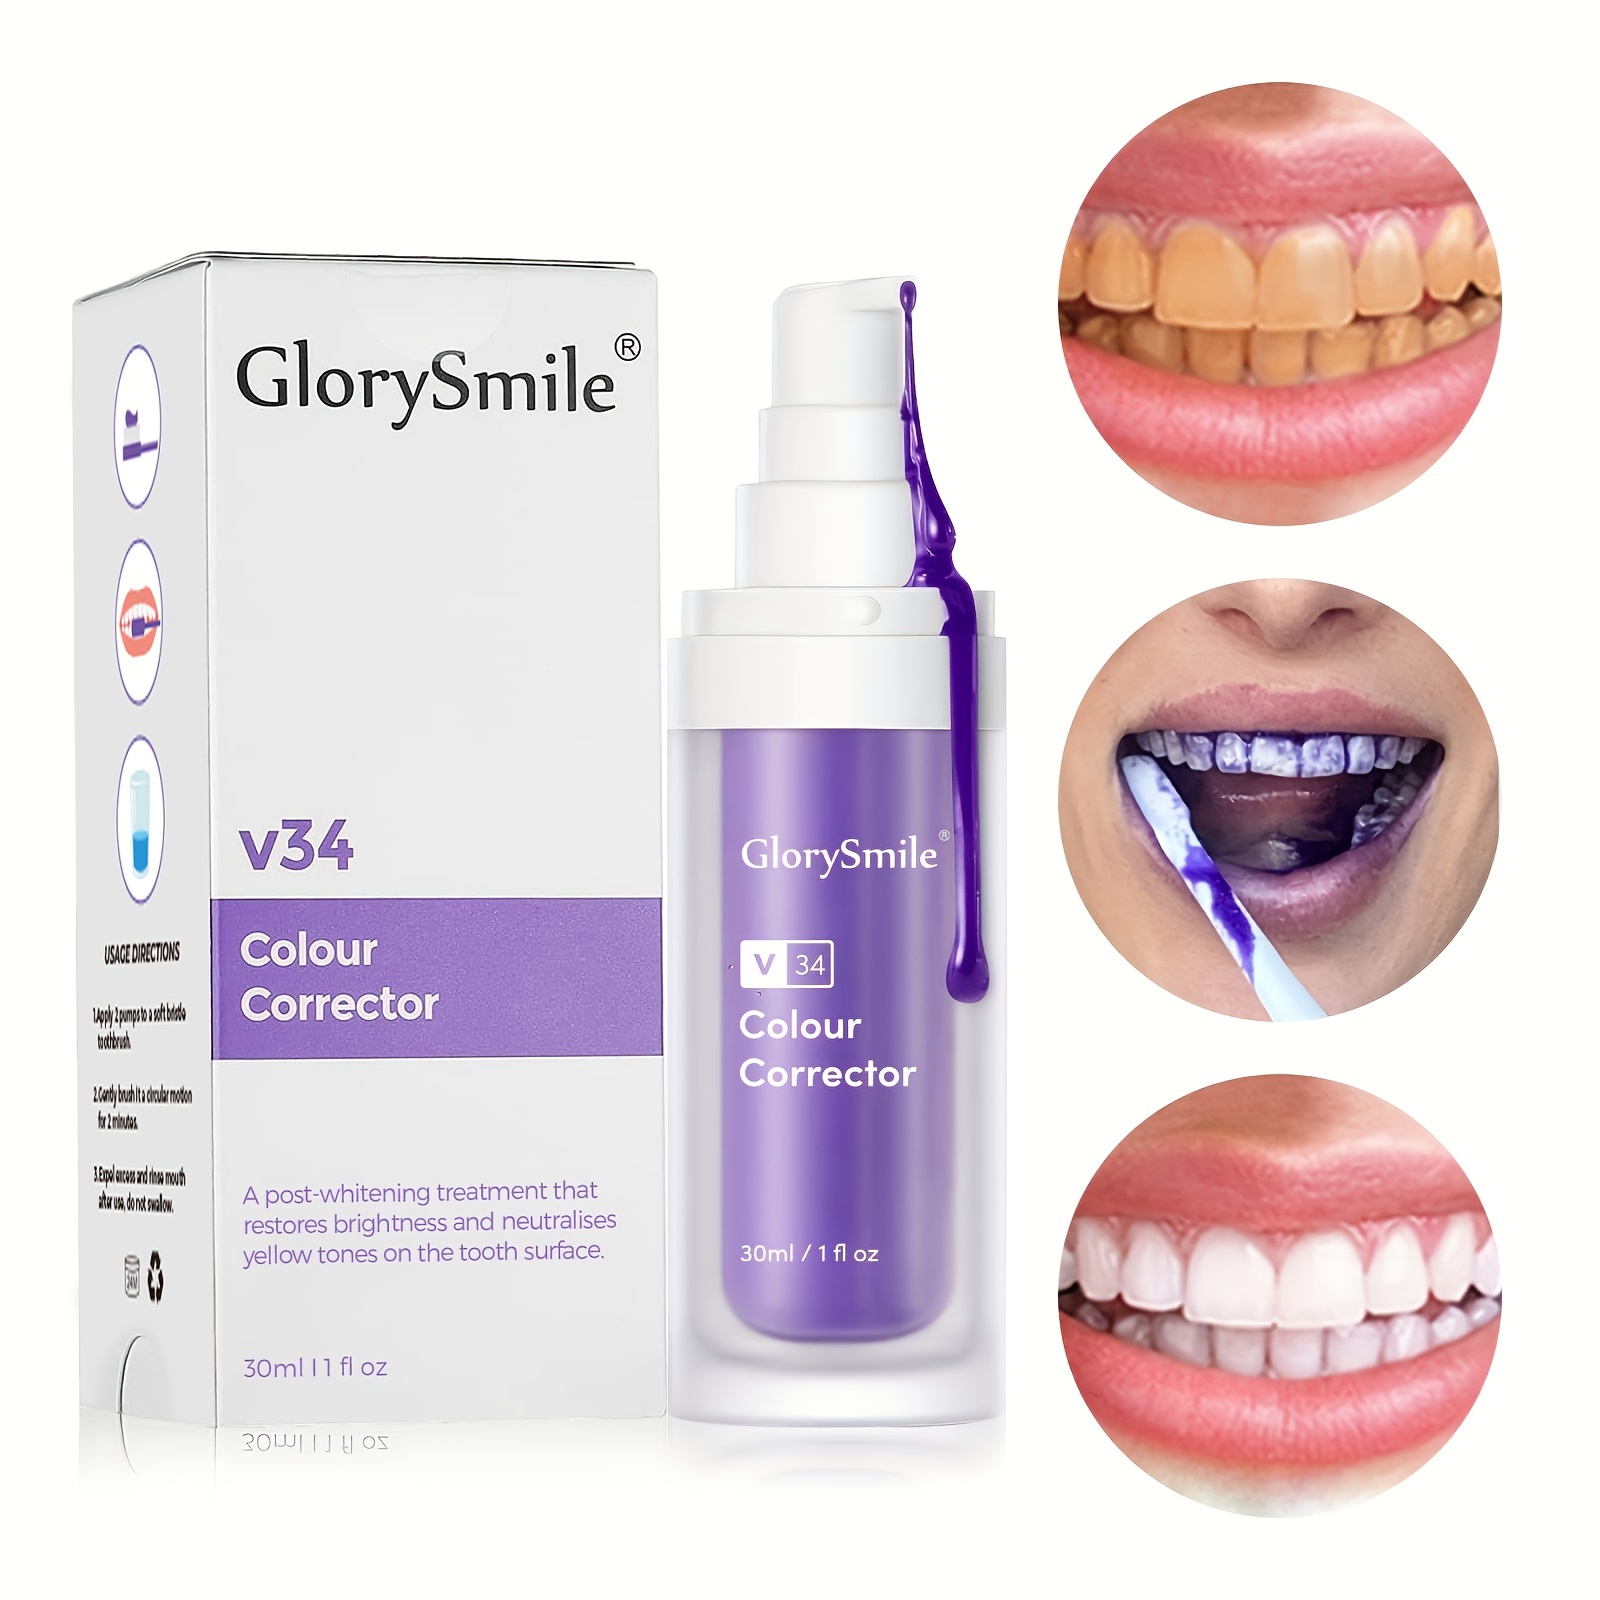 

V34 Colour Correcting Teeth Whitening Toothpaste - Sensitive, Stain Removal, Reduces Yellowing